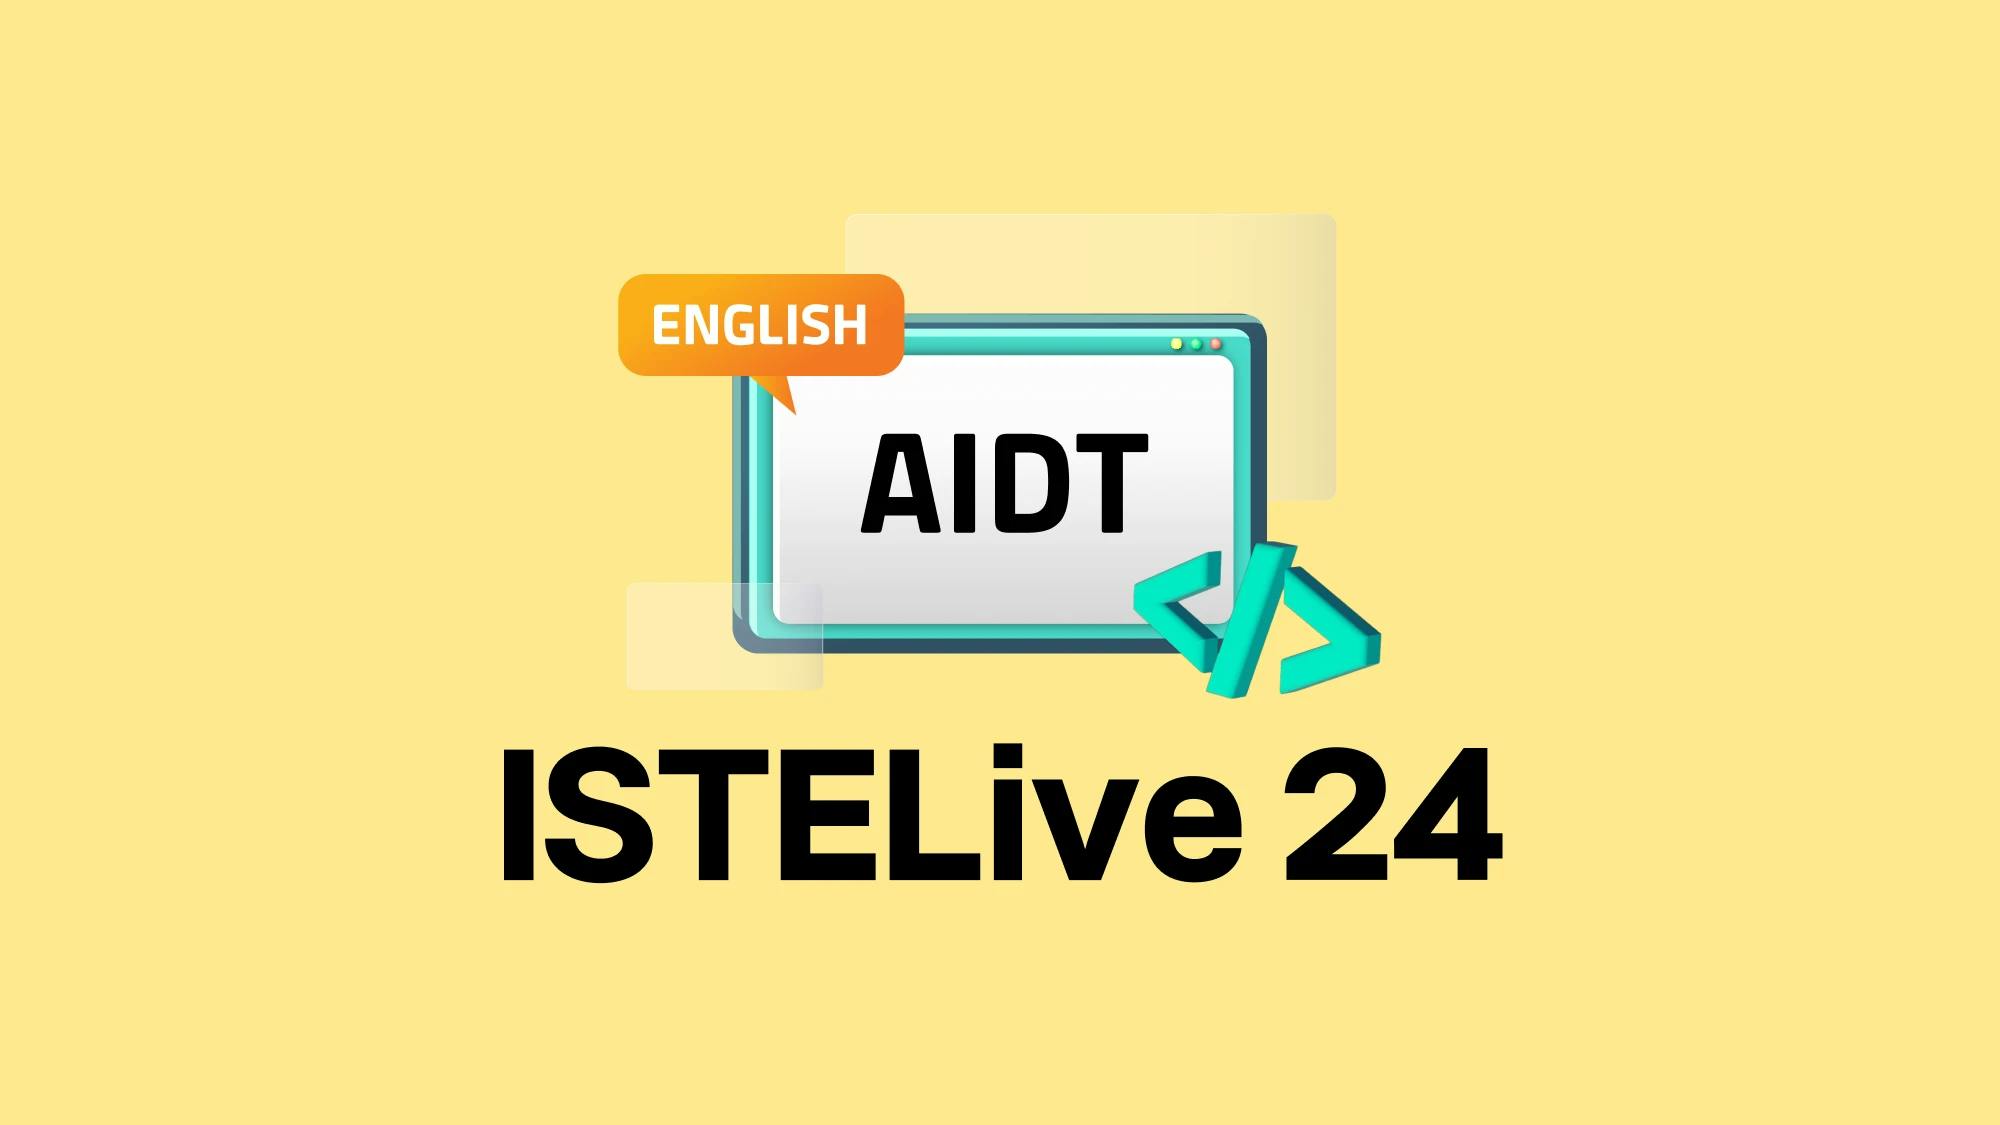 Elice, Inc. to Participate in ISTE Live 24, a US EdTech Conference